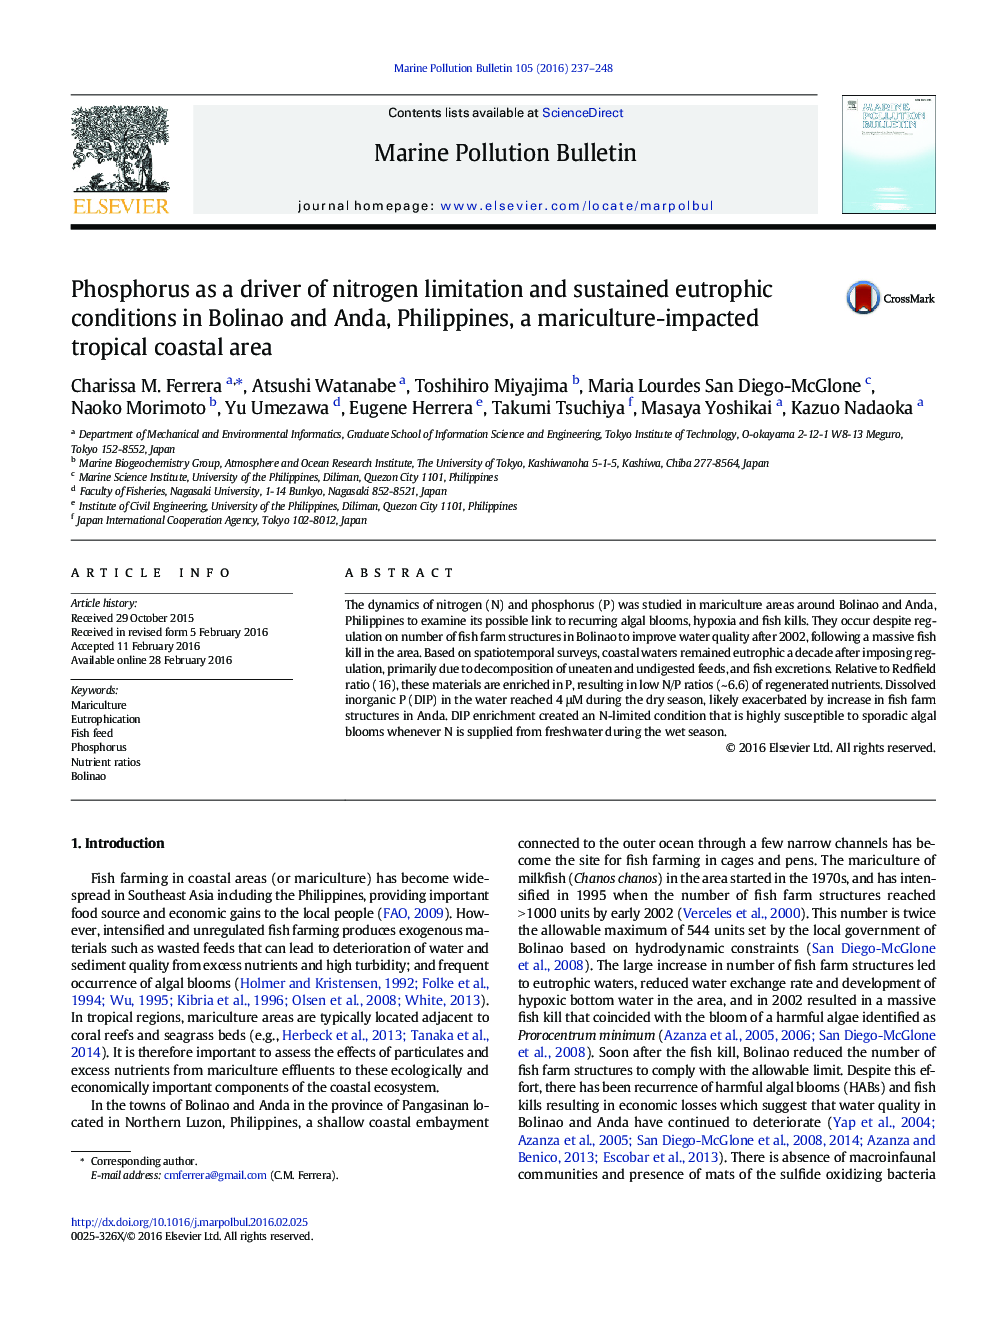 Phosphorus as a driver of nitrogen limitation and sustained eutrophic conditions in Bolinao and Anda, Philippines, a mariculture-impacted tropical coastal area